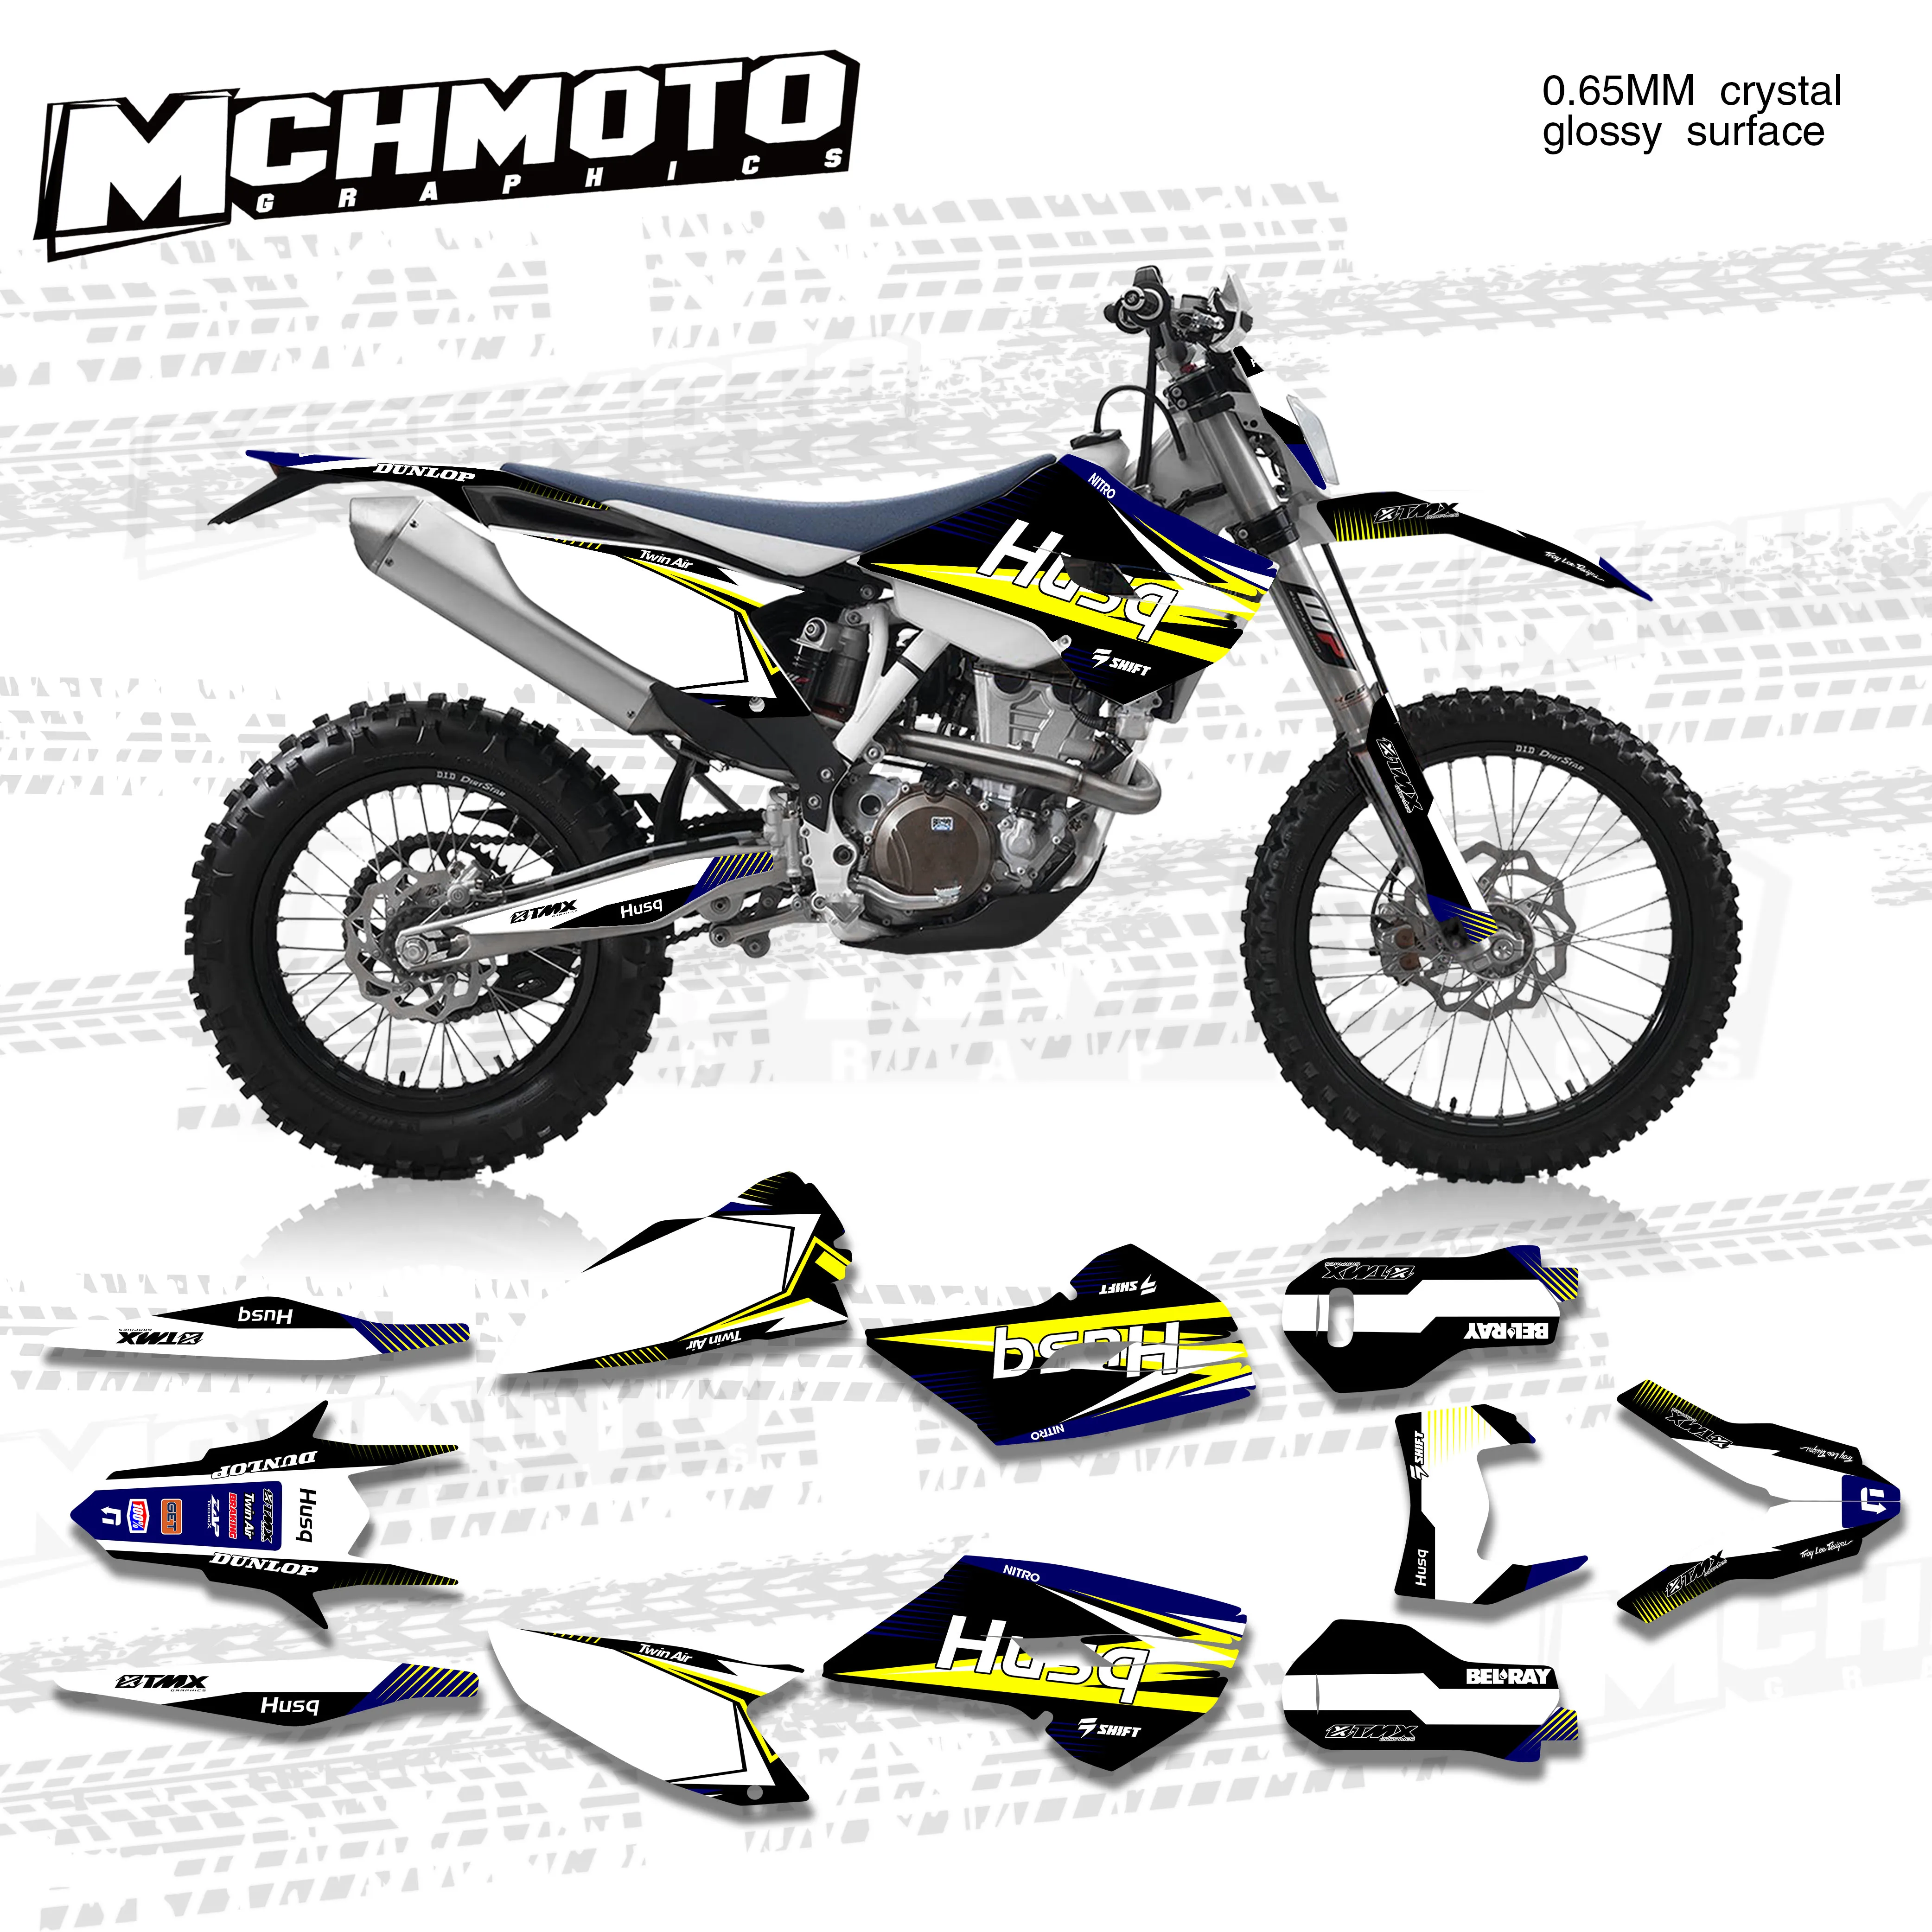 MCHMFG  Decal For Husqvarna TE FE 125 250 350 450 2014 2015 2016 Motorcycle Graphic Sticker for Husqvarna TC FC 2014-2015